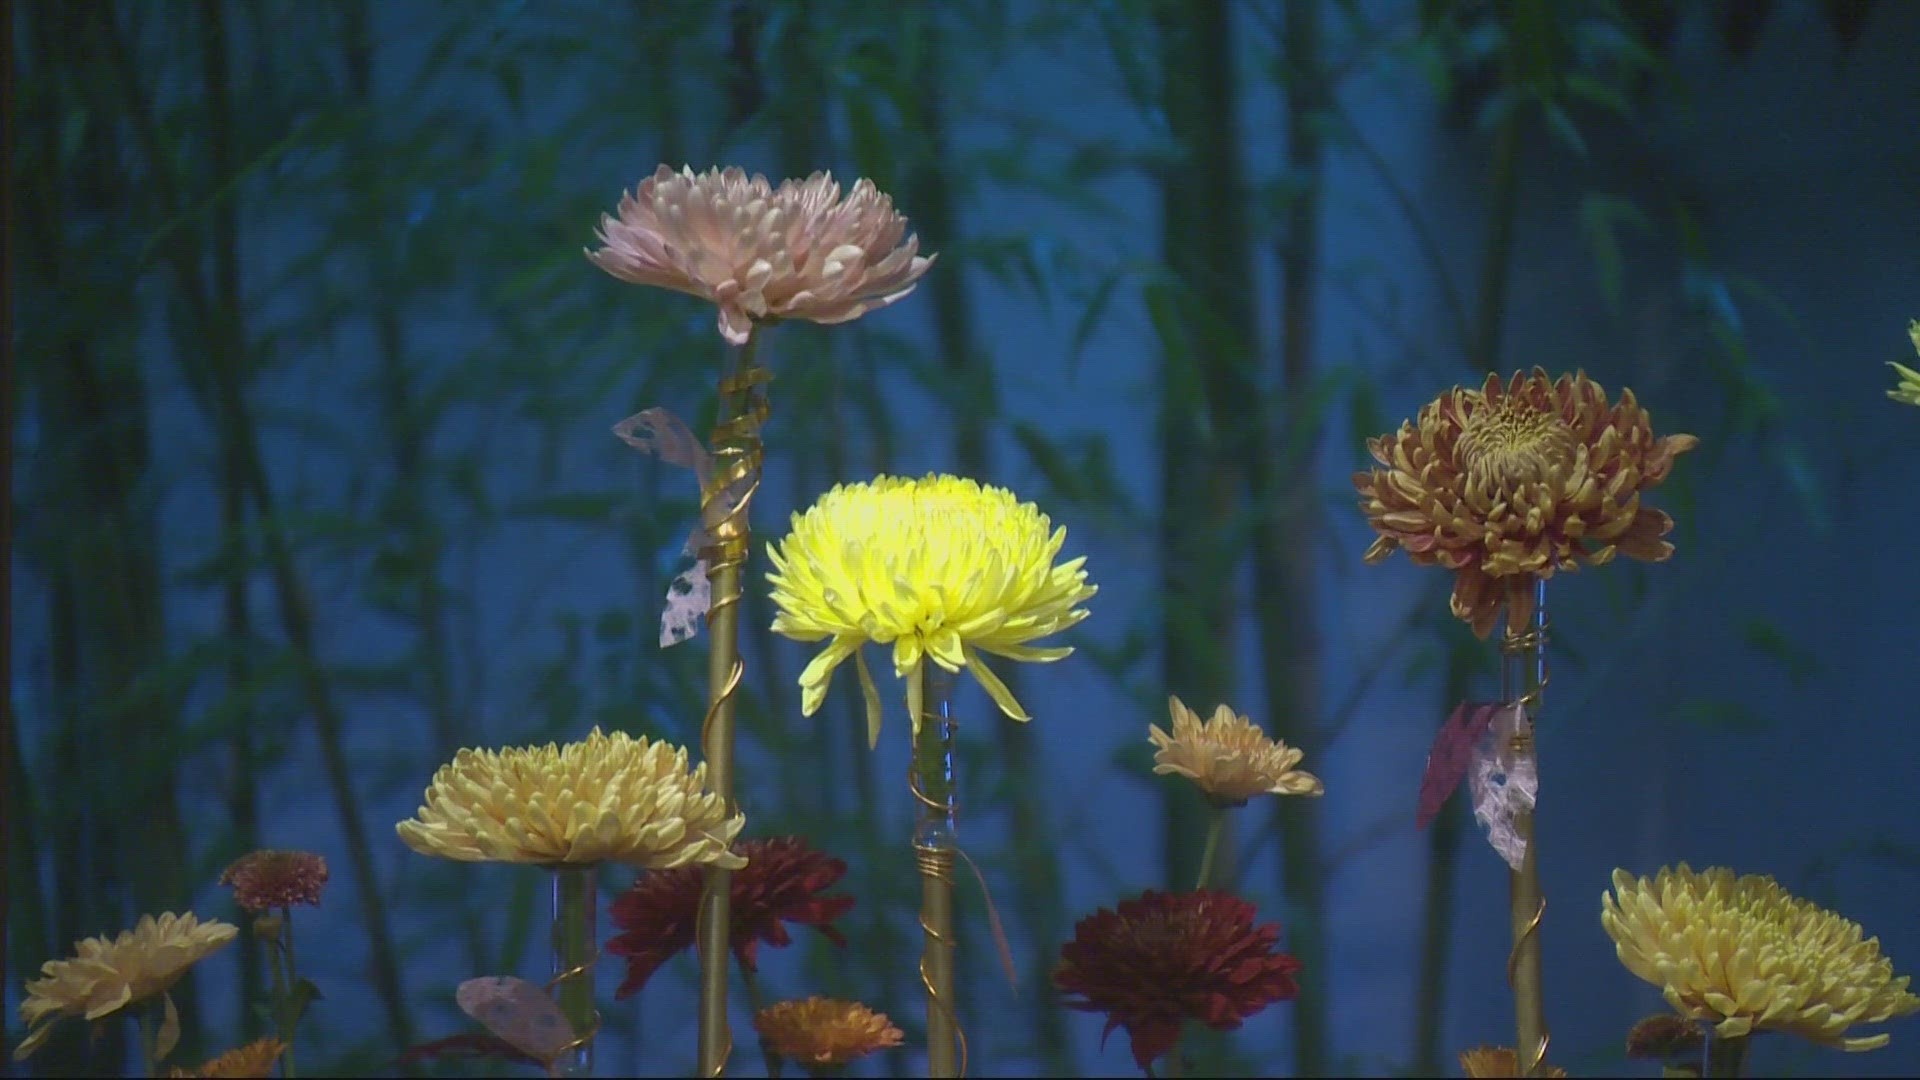 The biggest hit of the Nights of the Golden Flower event are the glow-in-the-dark chrysanthemums.